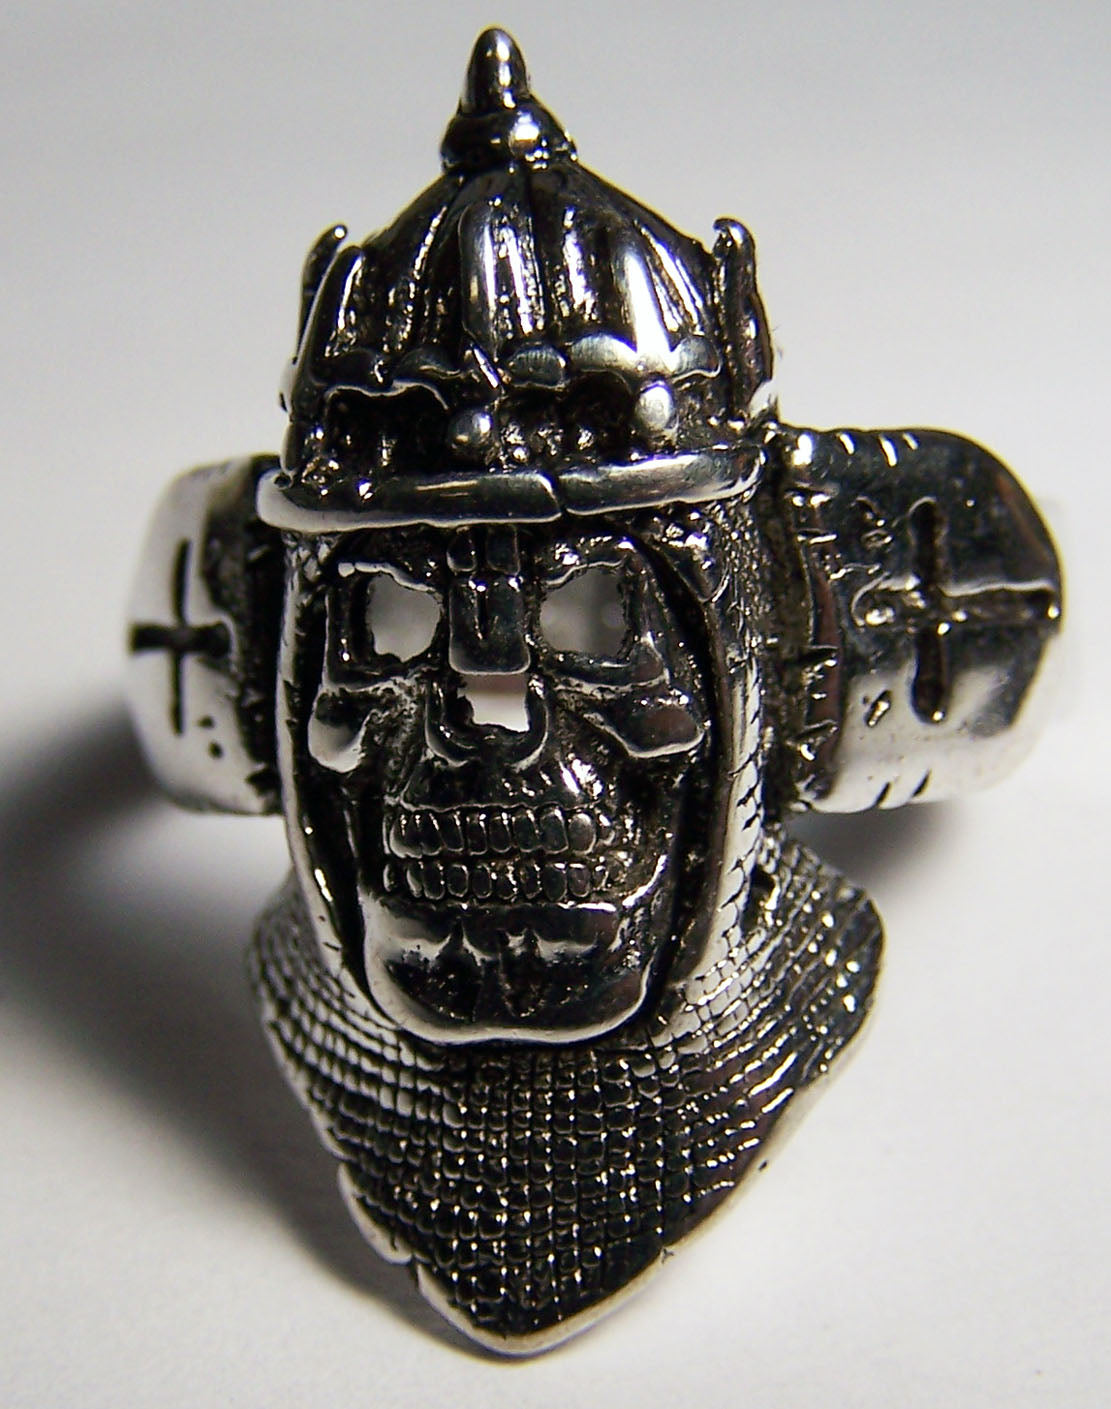 Wholesale MIDIEVAL KNIGHT SKULL IN ARMOR DELUXE BIKER RING (Sold by the piece)